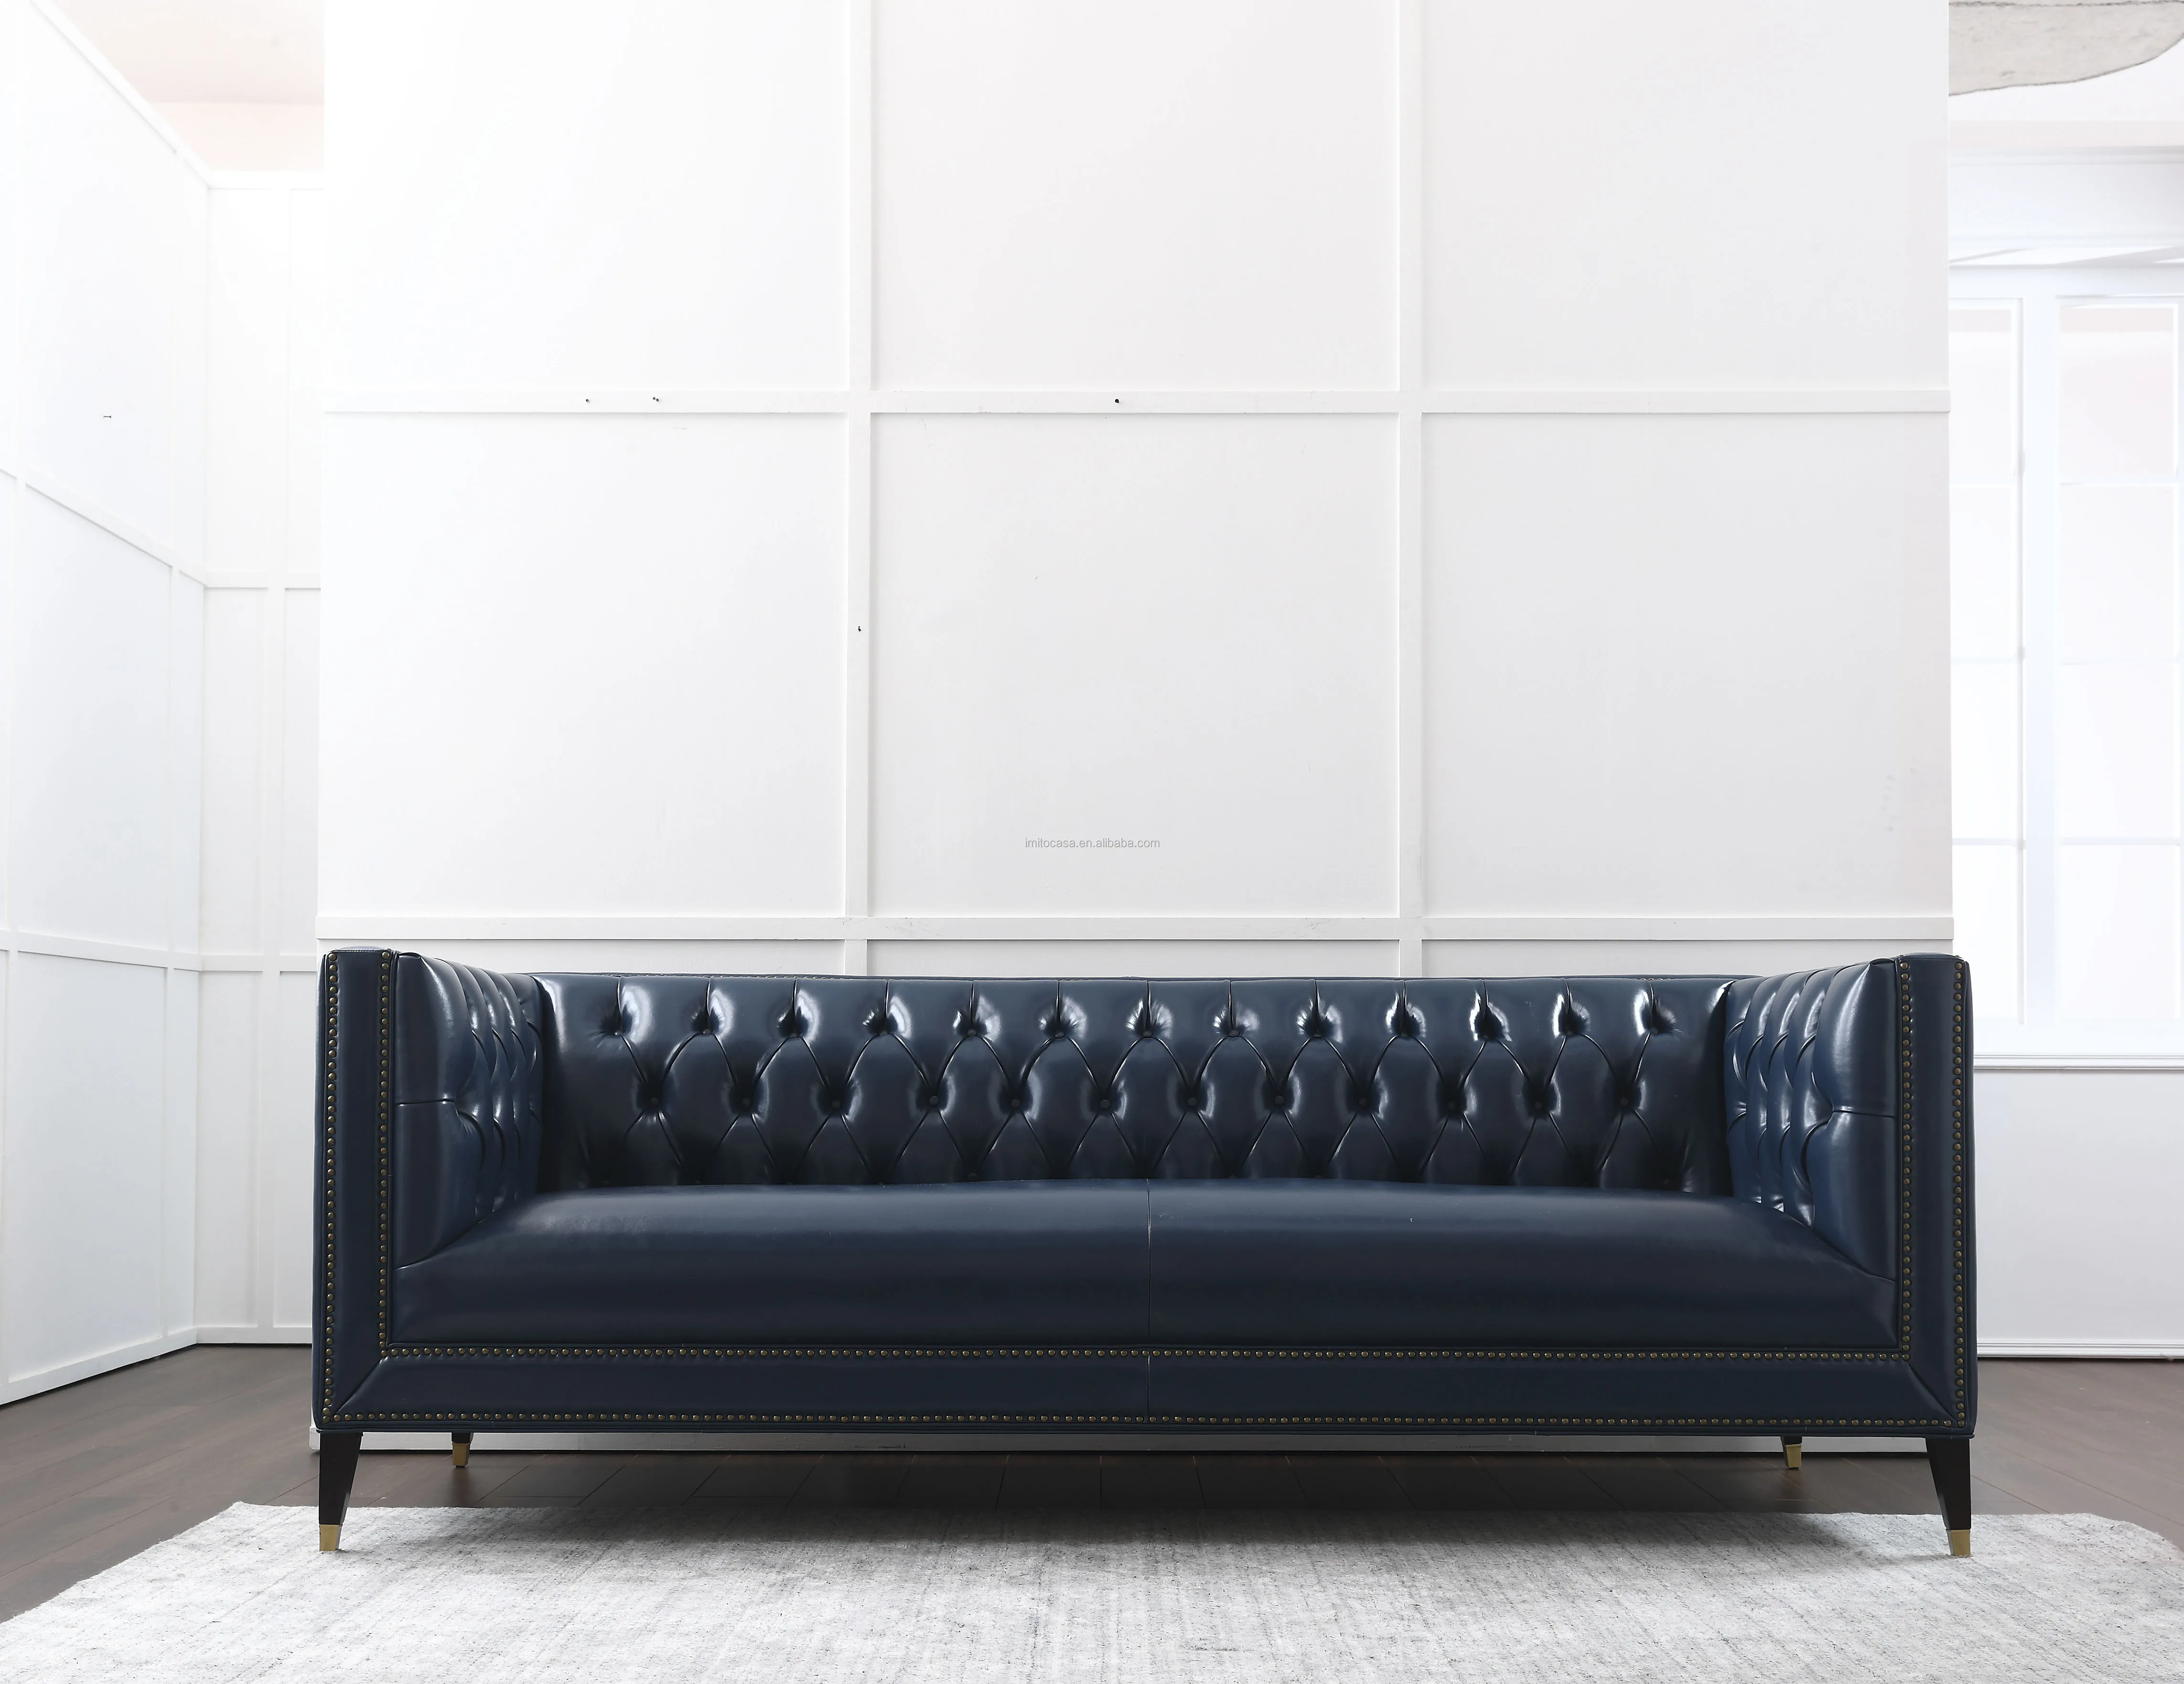 American Modern Living Room Furniture Sectional Sofa Set New Design Noble Navy Blue Leather Chesterfield Sofa Quality Sofa Couch Buy American Fabric Sofa